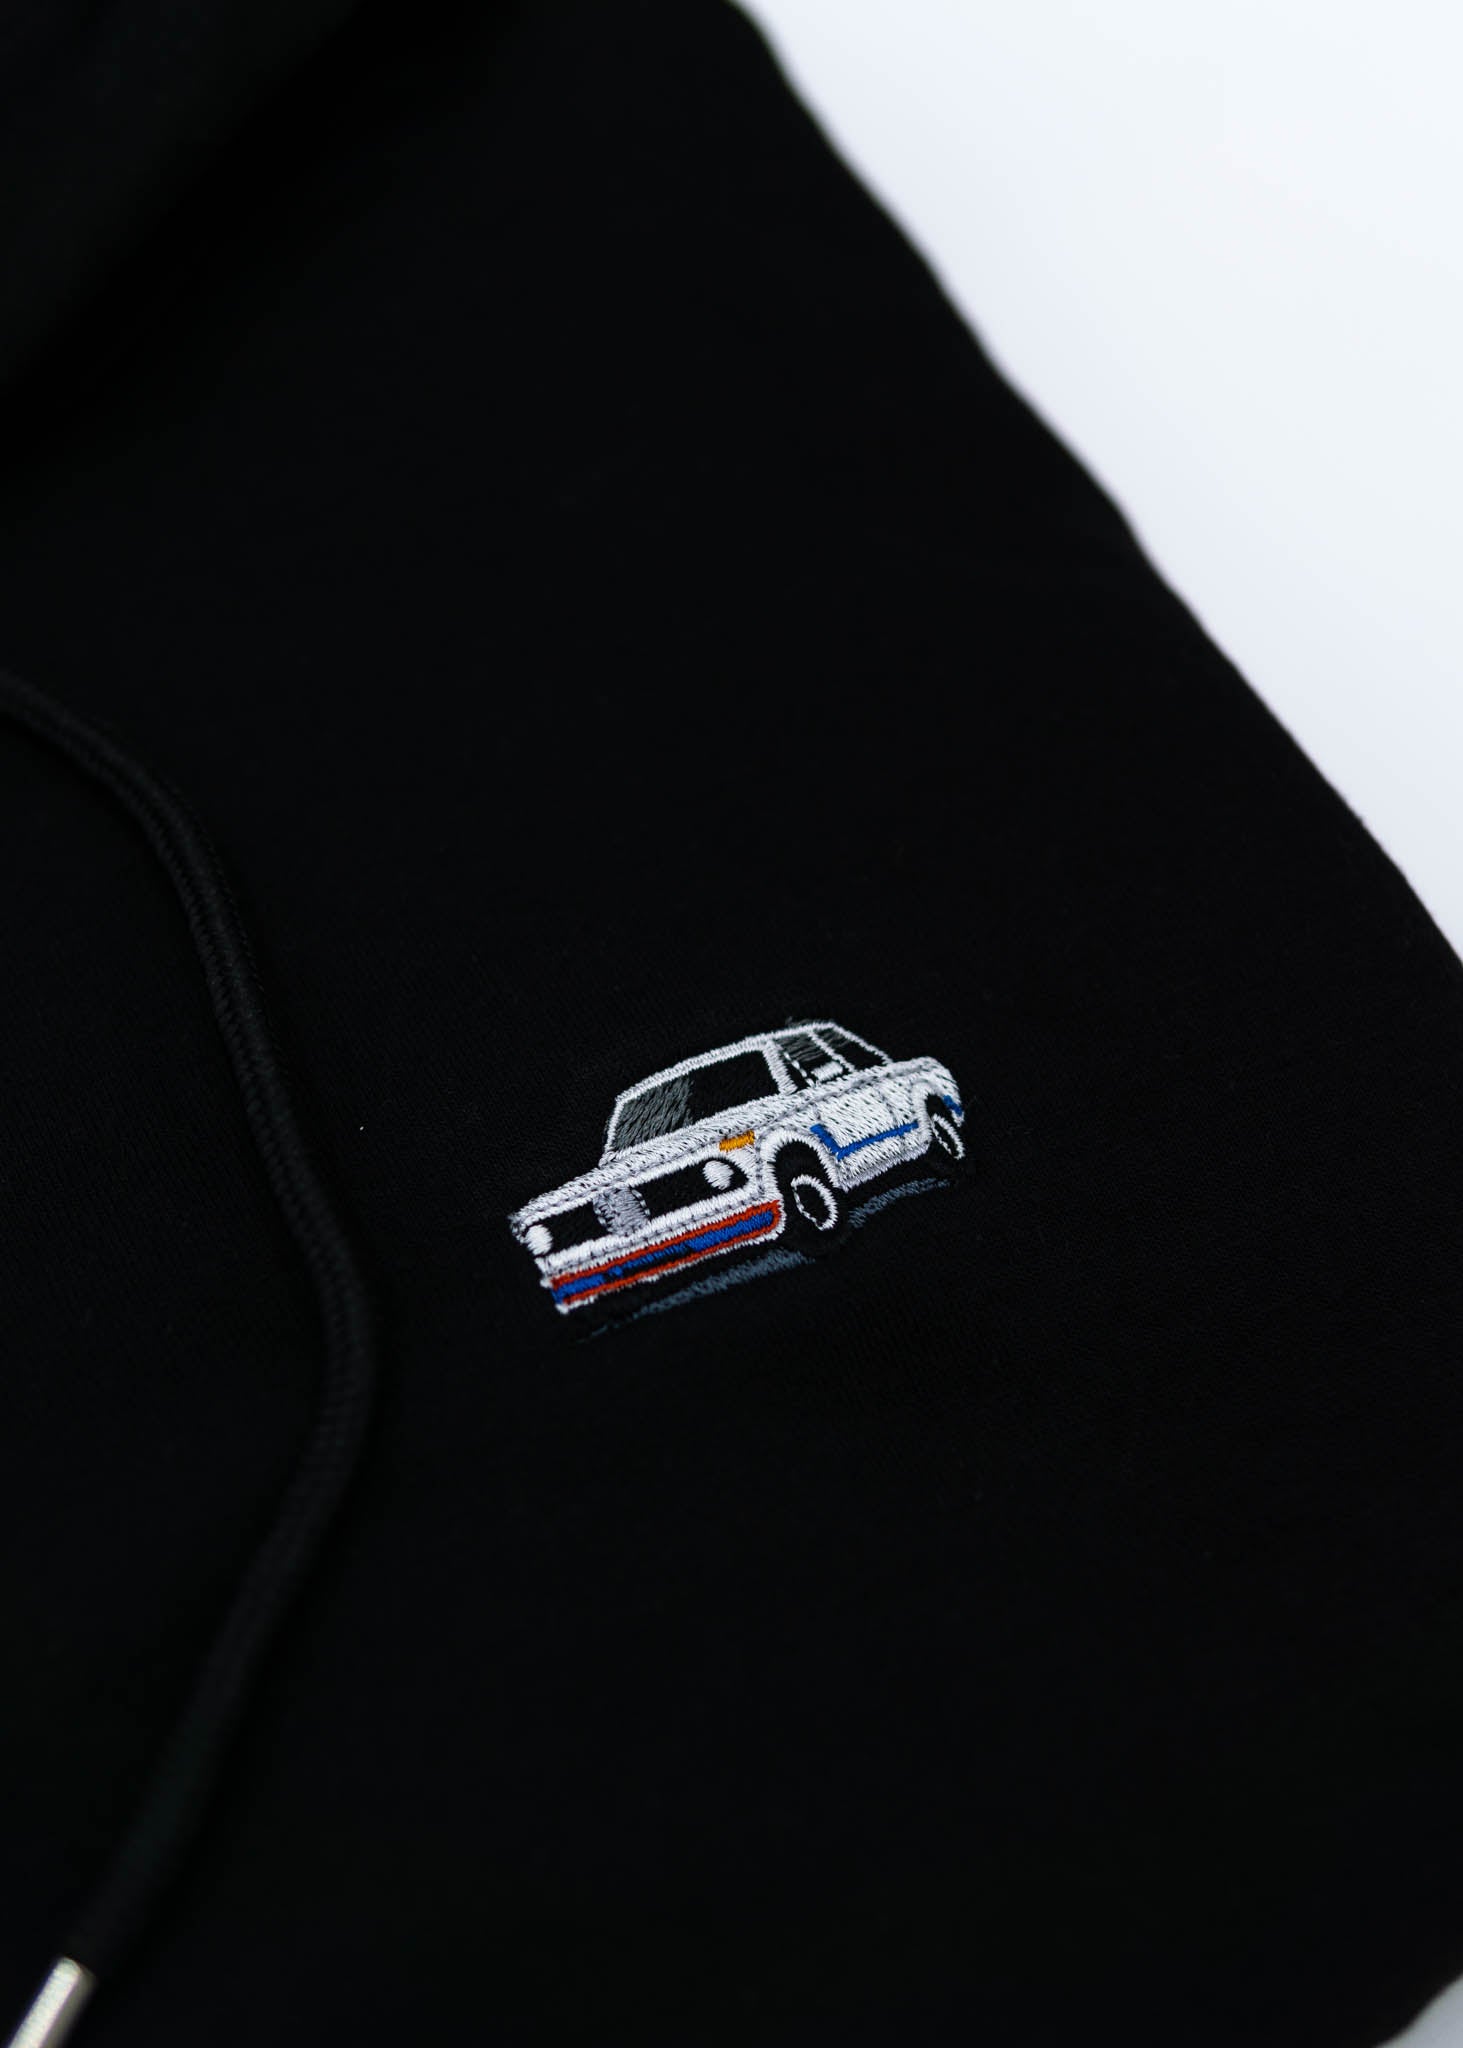 A black BMW cropped hoodie for women. Photo is a close up view of the cropped sweater with an embroidered BMW 2002 Turbo. Fabric composition is 100% cotton. The material is soft, comfortable, breathable, and non-transparent. The style of this crop hoodie is long sleeve, crewneck with a hood, hooded, with embroidery on the chest.